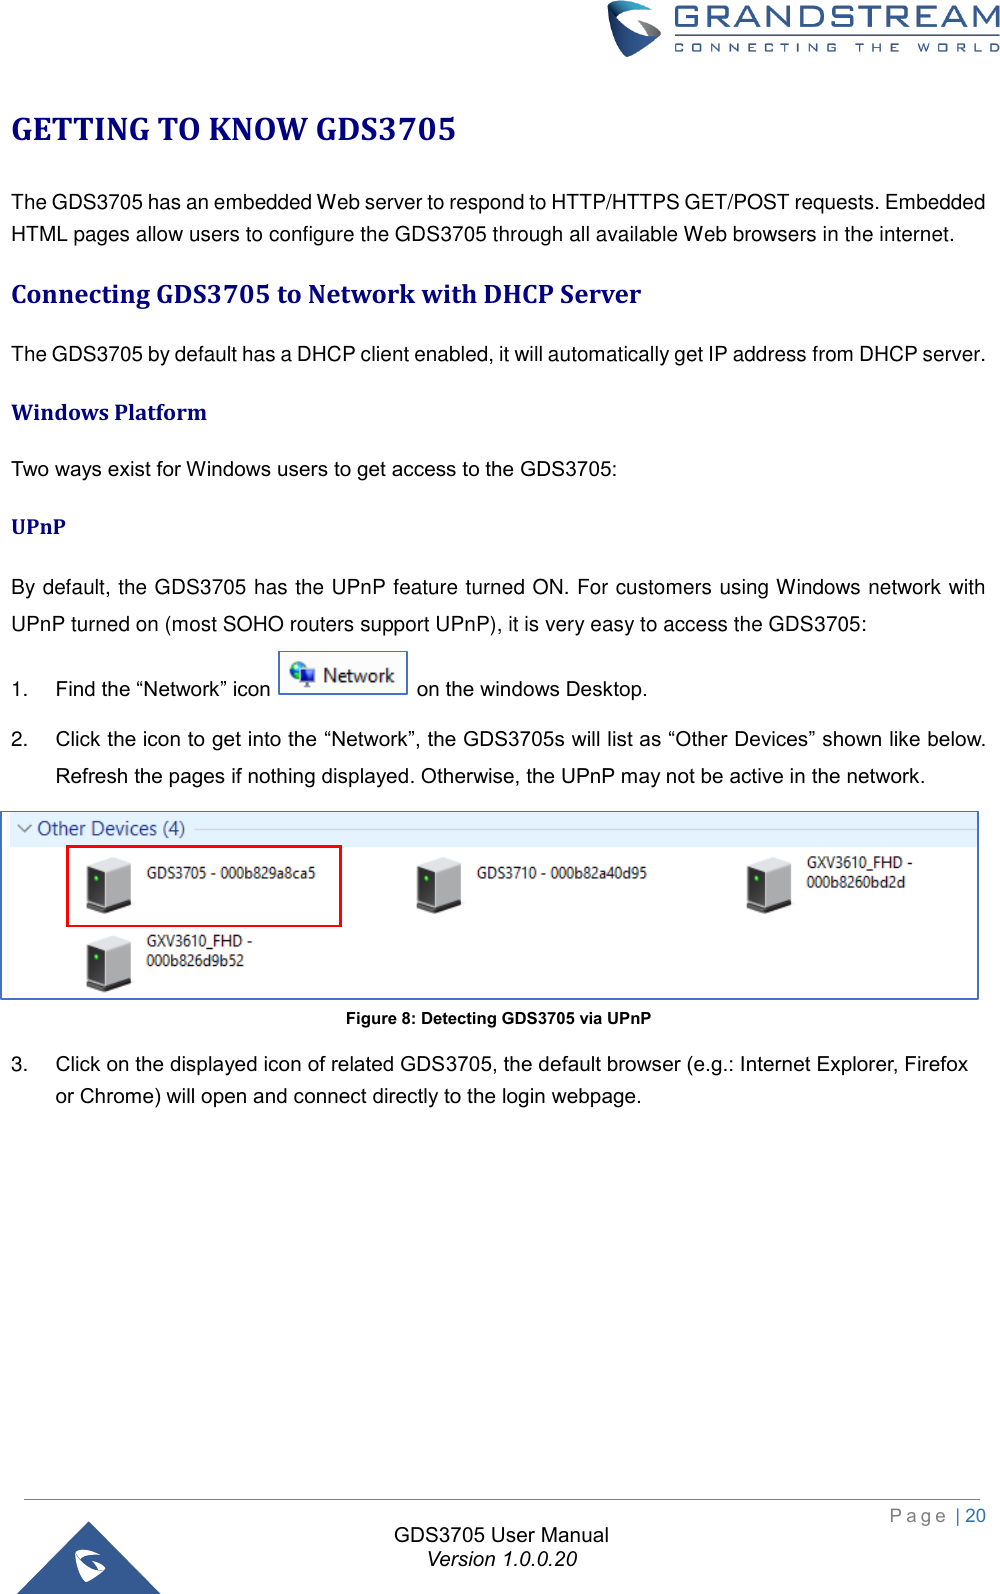                                                                         P a g e  | 20  GDS3705 User Manual Version 1.0.0.20 GETTING TO KNOW GDS3705 The GDS3705 has an embedded Web server to respond to HTTP/HTTPS GET/POST requests. Embedded HTML pages allow users to configure the GDS3705 through all available Web browsers in the internet.  Connecting GDS3705 to Network with DHCP Server The GDS3705 by default has a DHCP client enabled, it will automatically get IP address from DHCP server. Windows Platform Two ways exist for Windows users to get access to the GDS3705: UPnP By default, the GDS3705 has the UPnP feature turned ON. For customers using Windows network with UPnP turned on (most SOHO routers support UPnP), it is very easy to access the GDS3705: 1. Find the “Network” icon   on the windows Desktop. 2. Click the icon to get into the “Network”, the GDS3705s will list as “Other Devices” shown like below. Refresh the pages if nothing displayed. Otherwise, the UPnP may not be active in the network.  Figure 8: Detecting GDS3705 via UPnP 3. Click on the displayed icon of related GDS3705, the default browser (e.g.: Internet Explorer, Firefox or Chrome) will open and connect directly to the login webpage. 